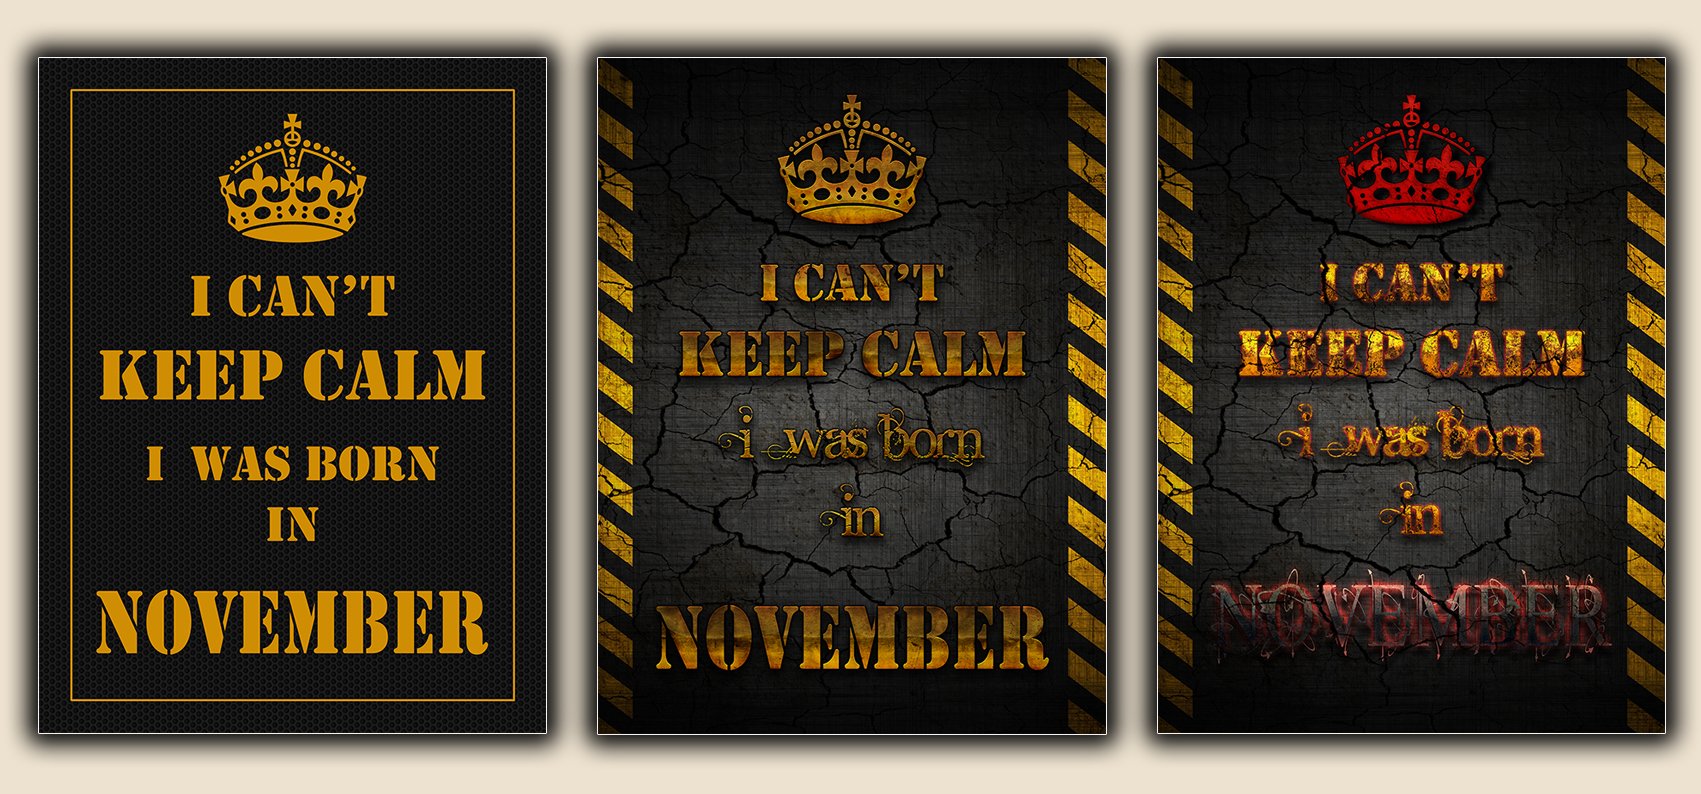 I Can't Keep Calm - I was Born in November